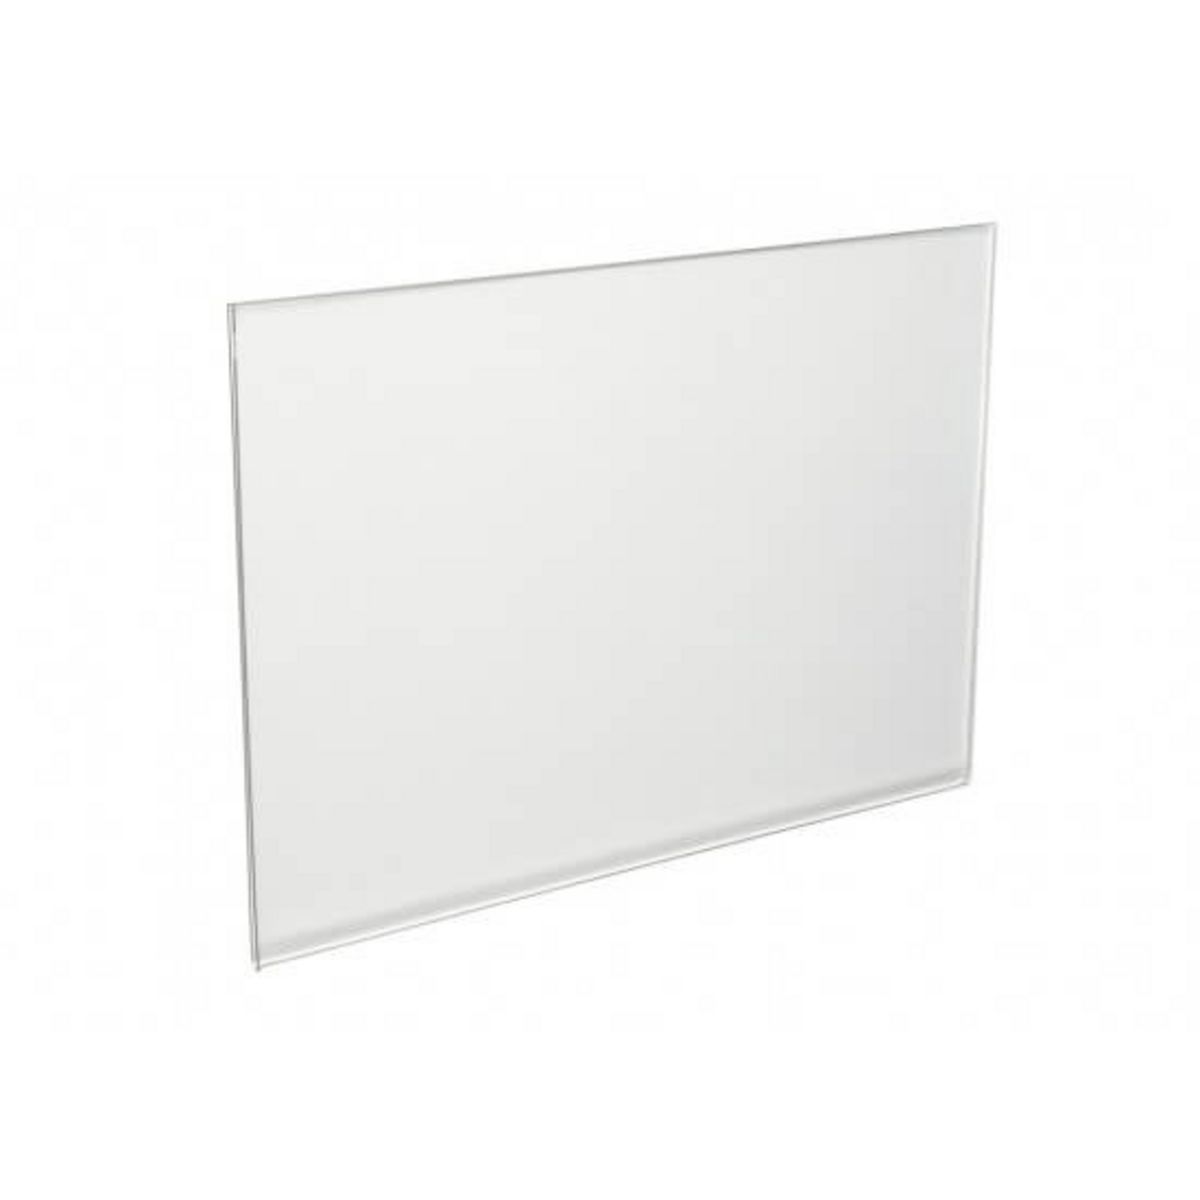 Acrylic poster sleeve available with adhesive fixings.jpg